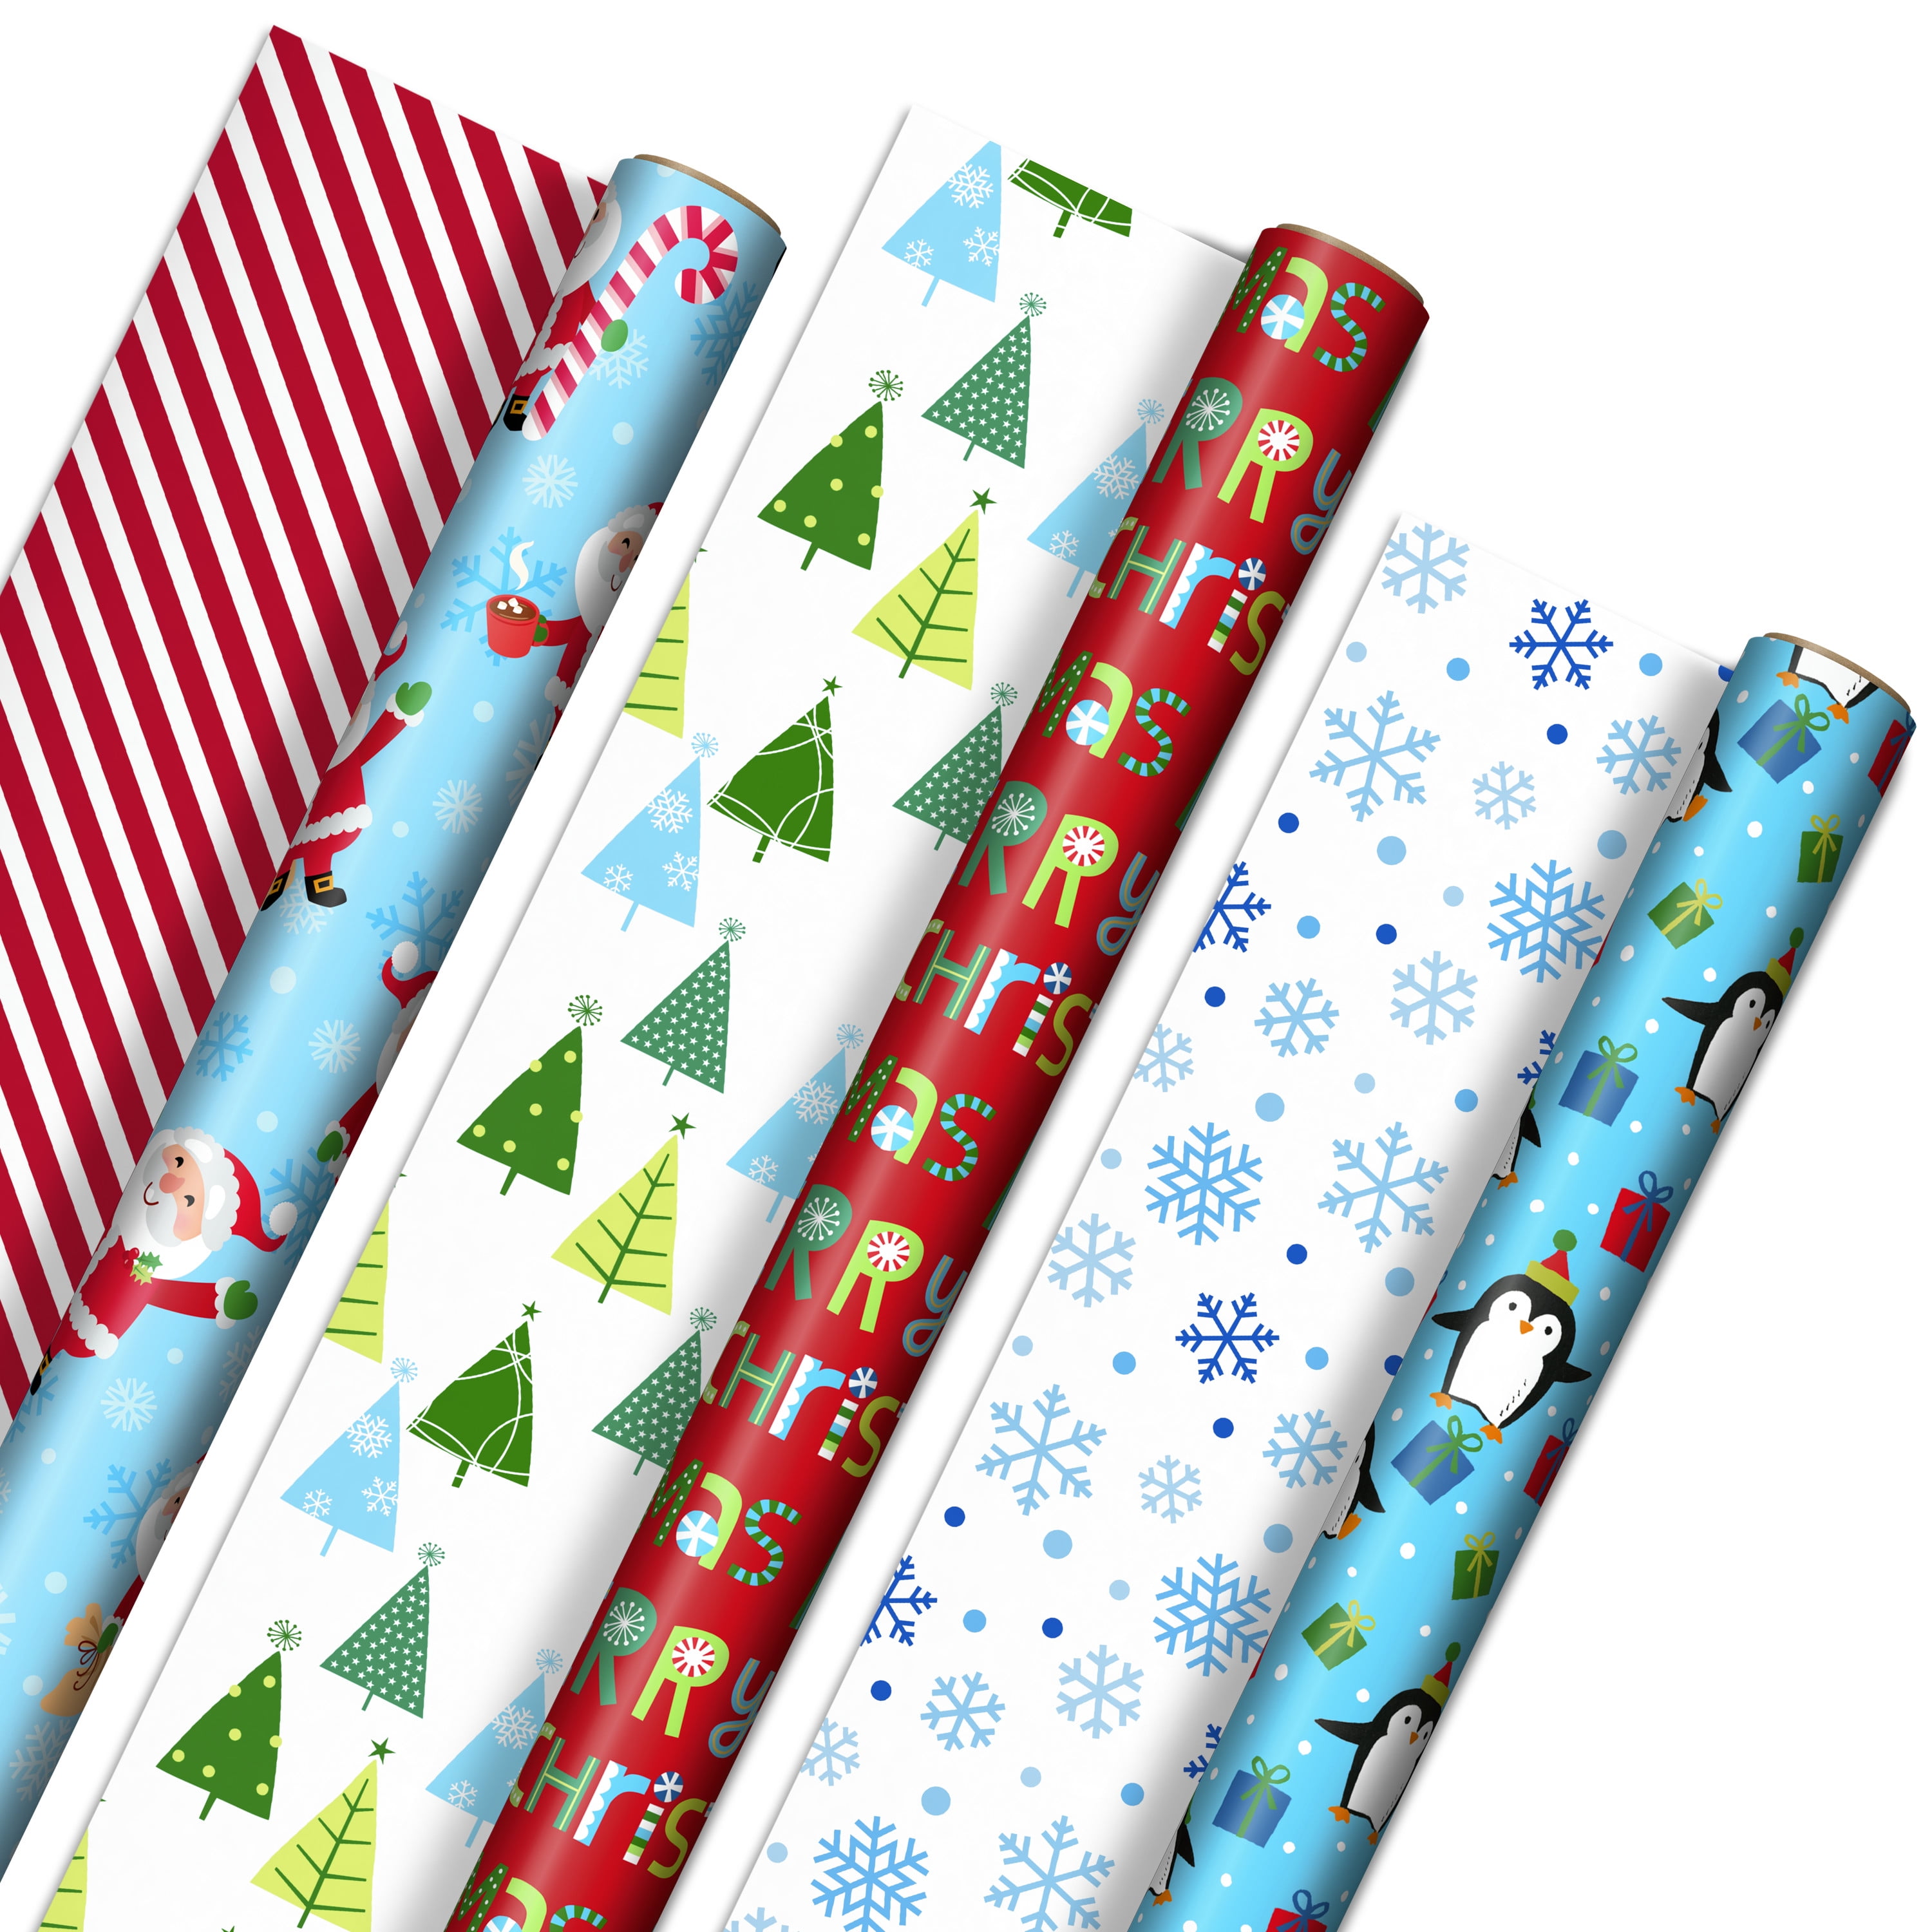 Hallmark Cute Reversible Christmas Wrapping Paper for Kids (3 Rolls: 120  sq. ft. ttl) Penguins, Santa, Trees, Stripes, Snowflakes, Merry Christmas